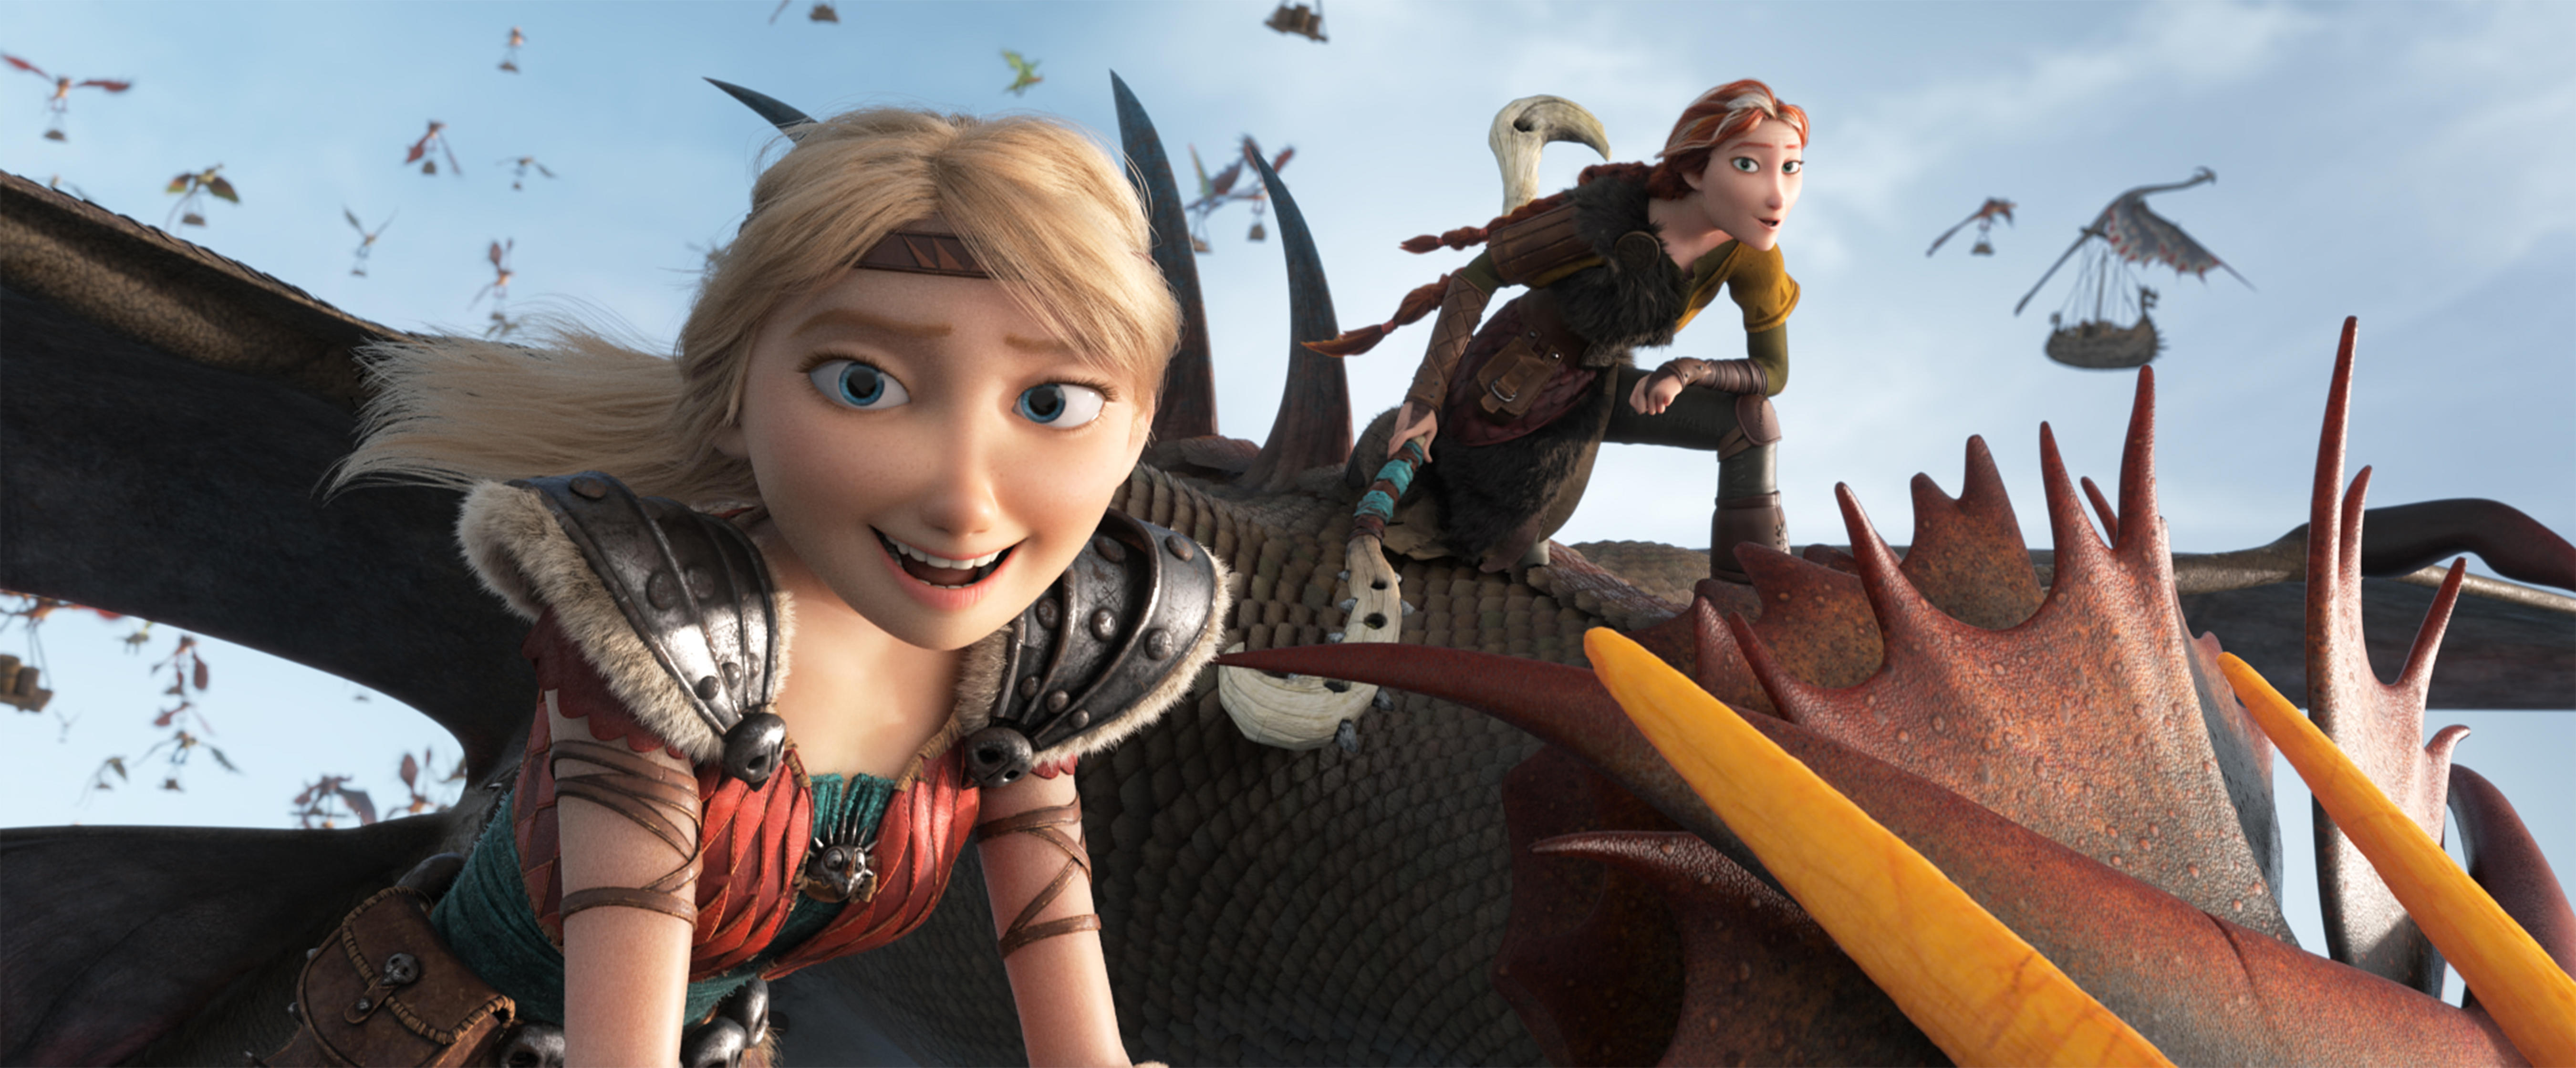 Astrid How To Train Your Dragon How To Train Your Dragon The Hidden World Valka How To Train Your Dr 5400x2239